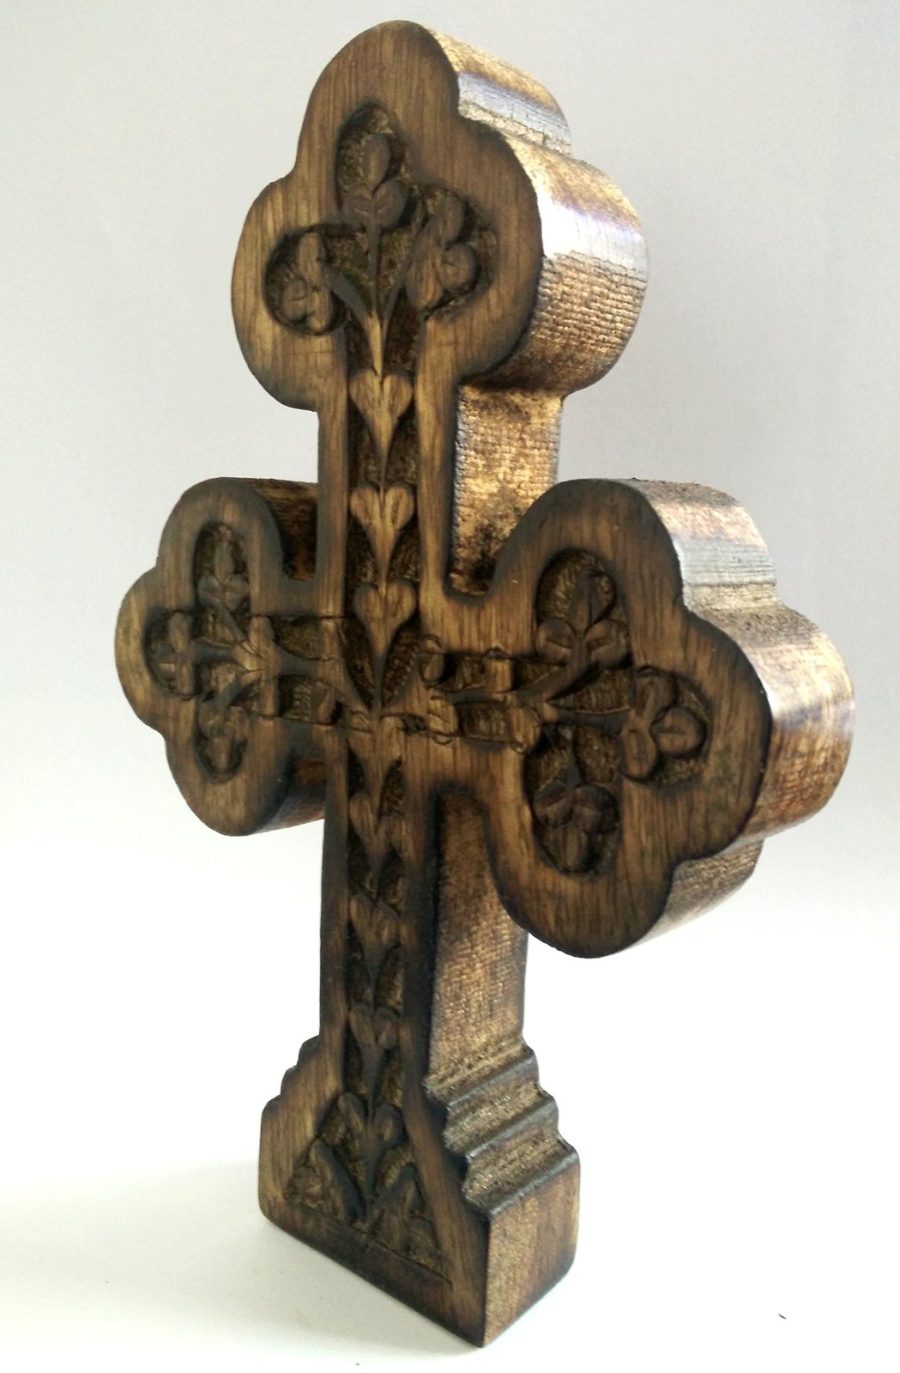 Handmade Wooden Holy Orthodox Religious Wood Carved Wall Cross Christ Crucifi...